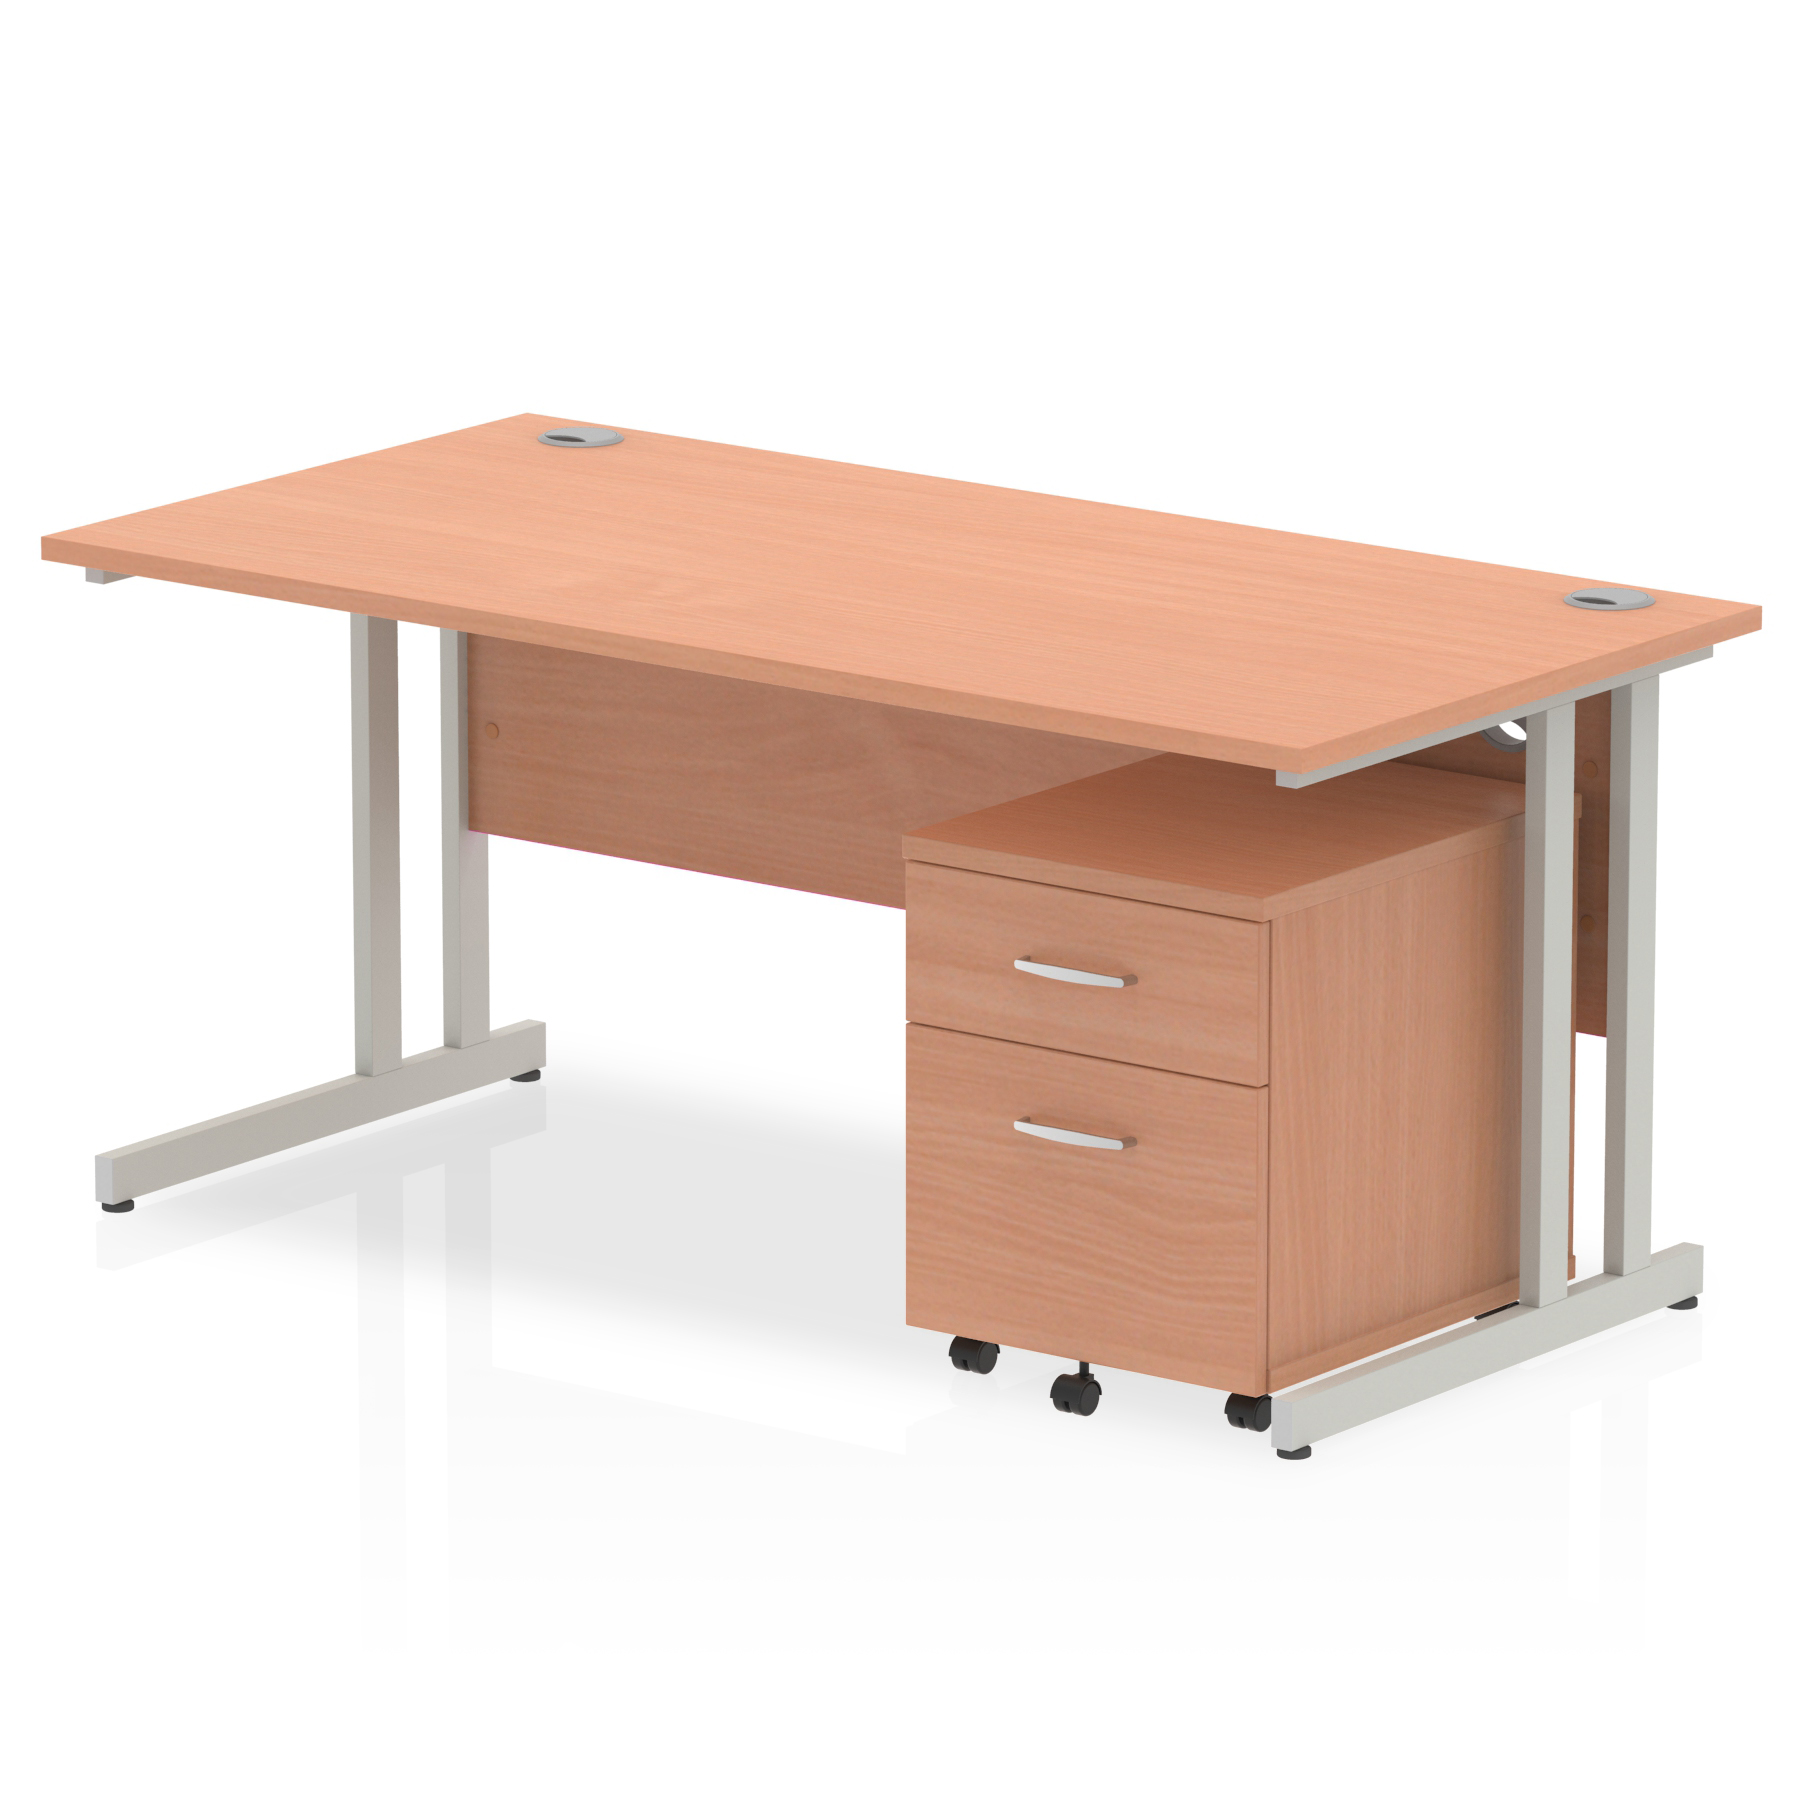 Impulse 1600 x 800mm Straight Desk Beech Top Silver Cantilever Leg with 2 Drawer Mobile Pedestal